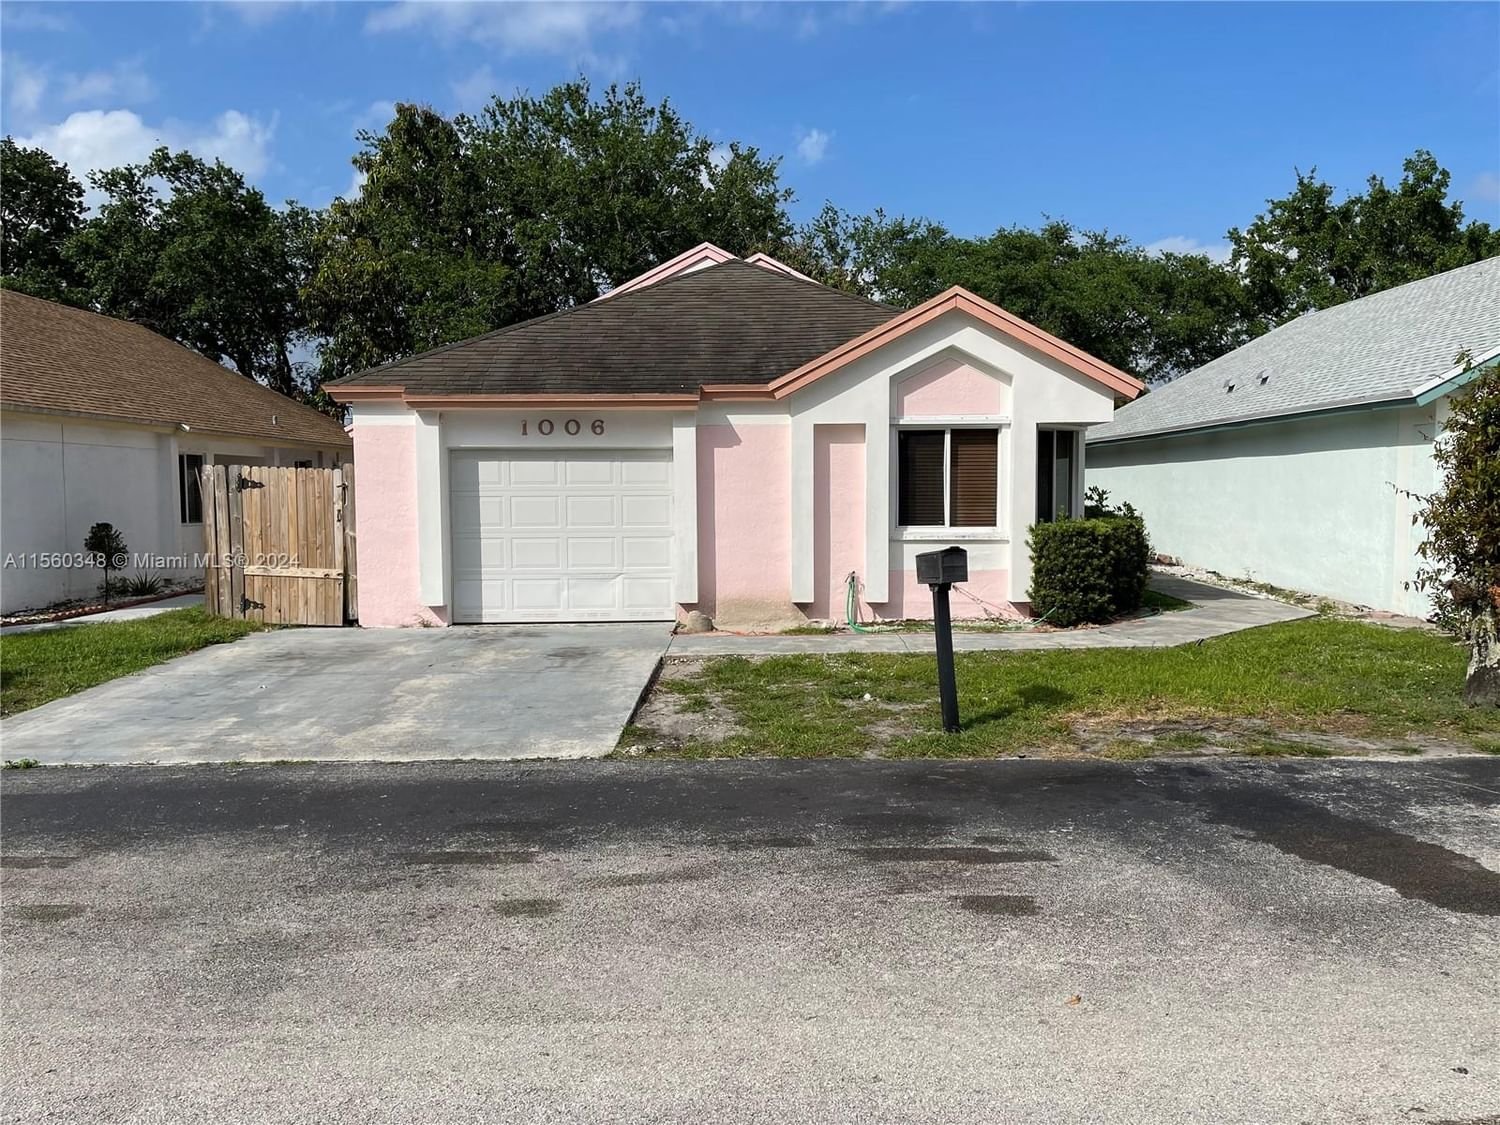 Real estate property located at 1006 Jasmine Ln, Broward County, NORTH LAUDERDALE DIVISION, North Lauderdale, FL